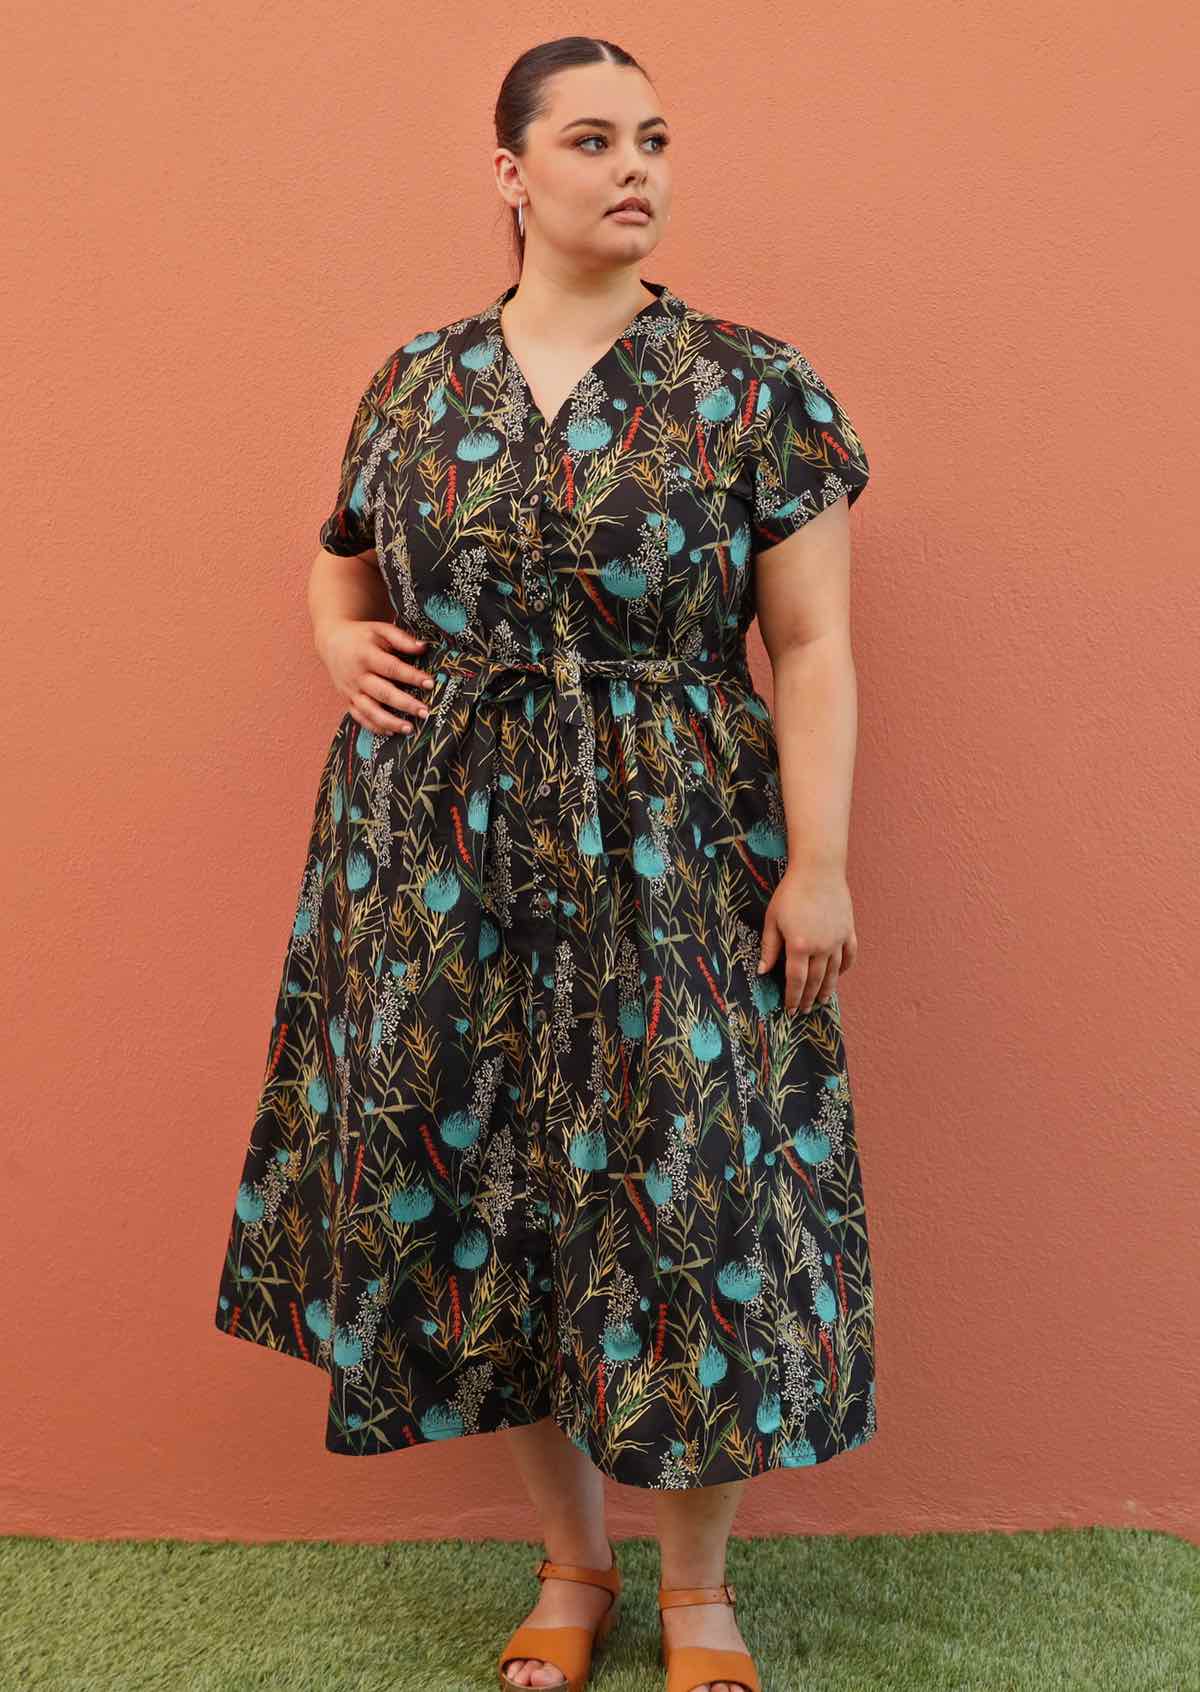 Plus size model wearing Vivien dress in black and teal with pockets and v neck line